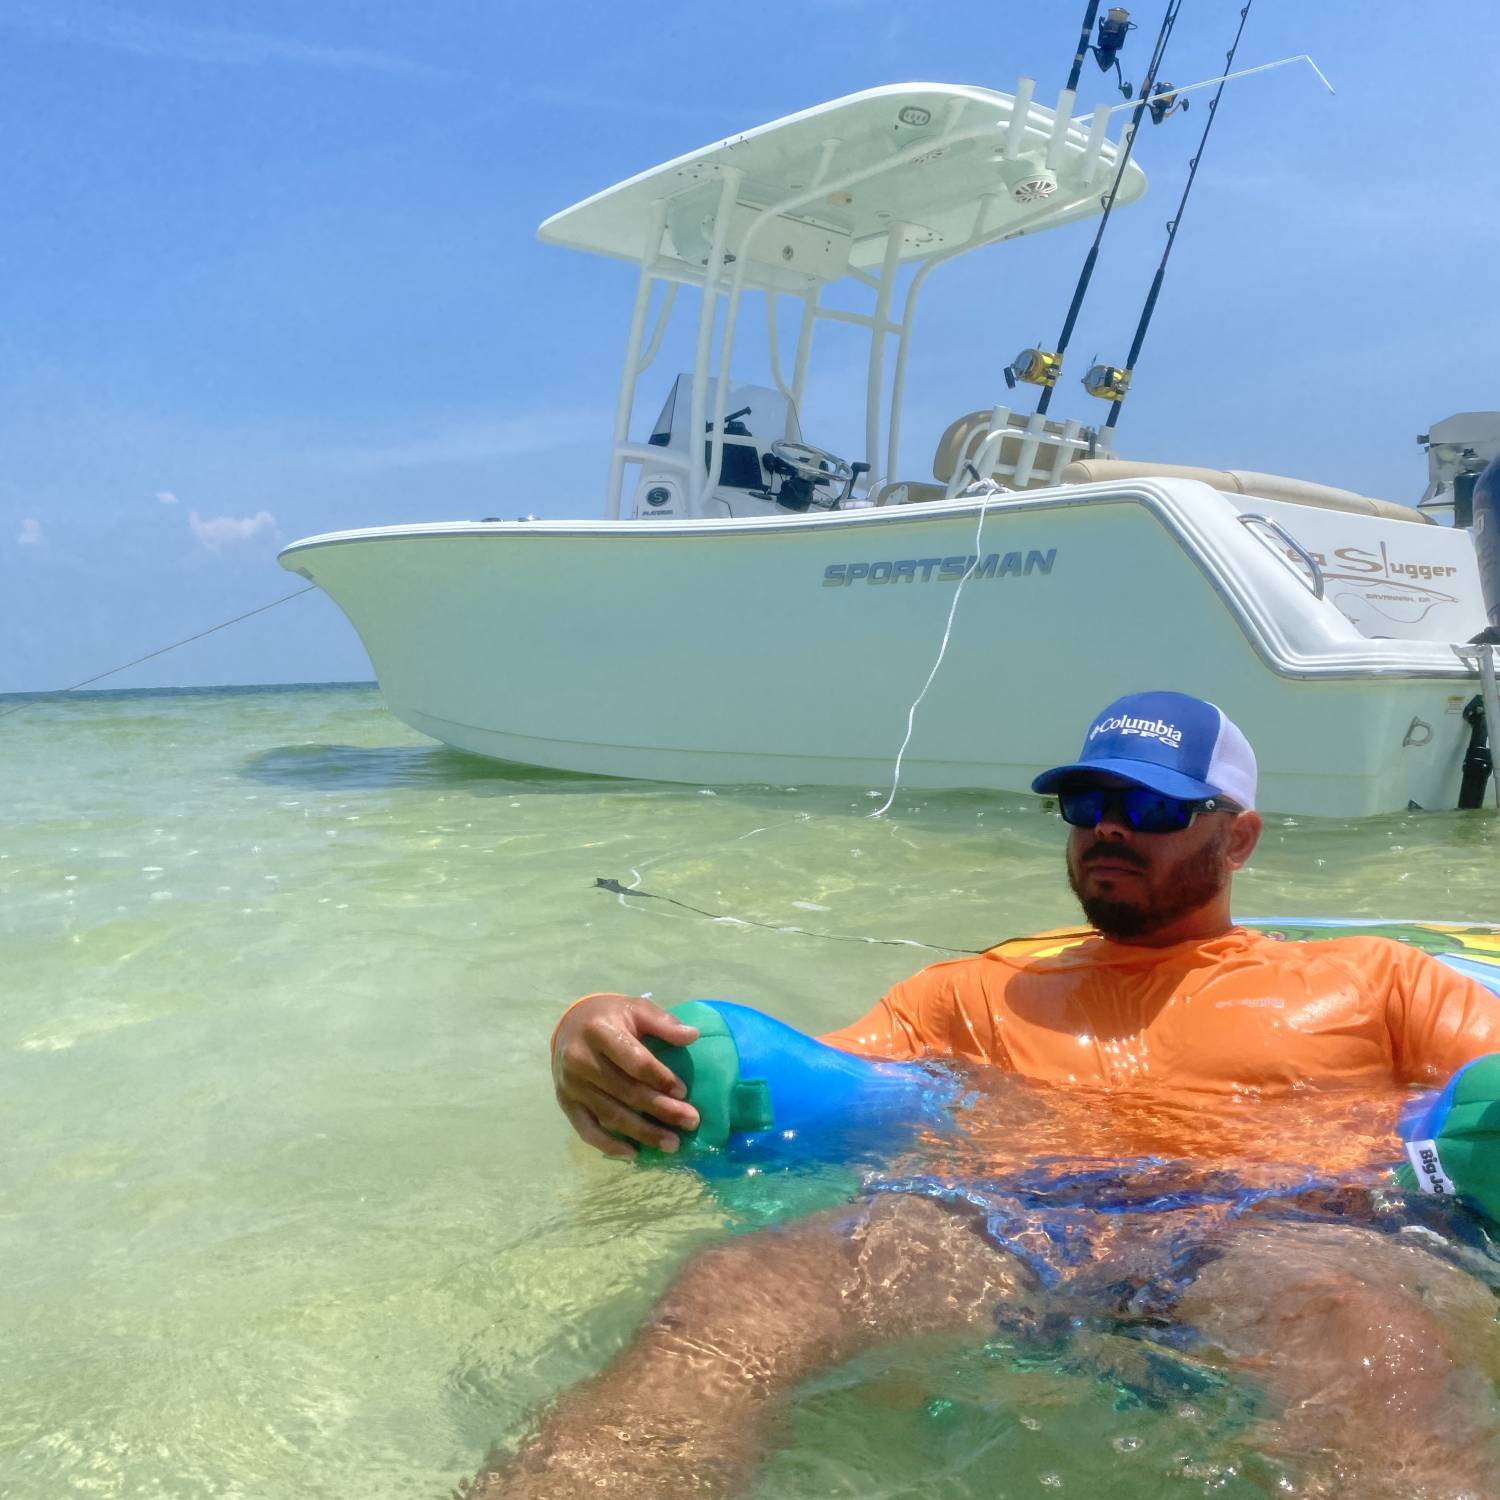 Title: Relaxing day at the Sandbar - On board their Sportsman Heritage 231 Center Console - Location: Marathon, FL. Participating in the Photo Contest #SportsmanAugust2021